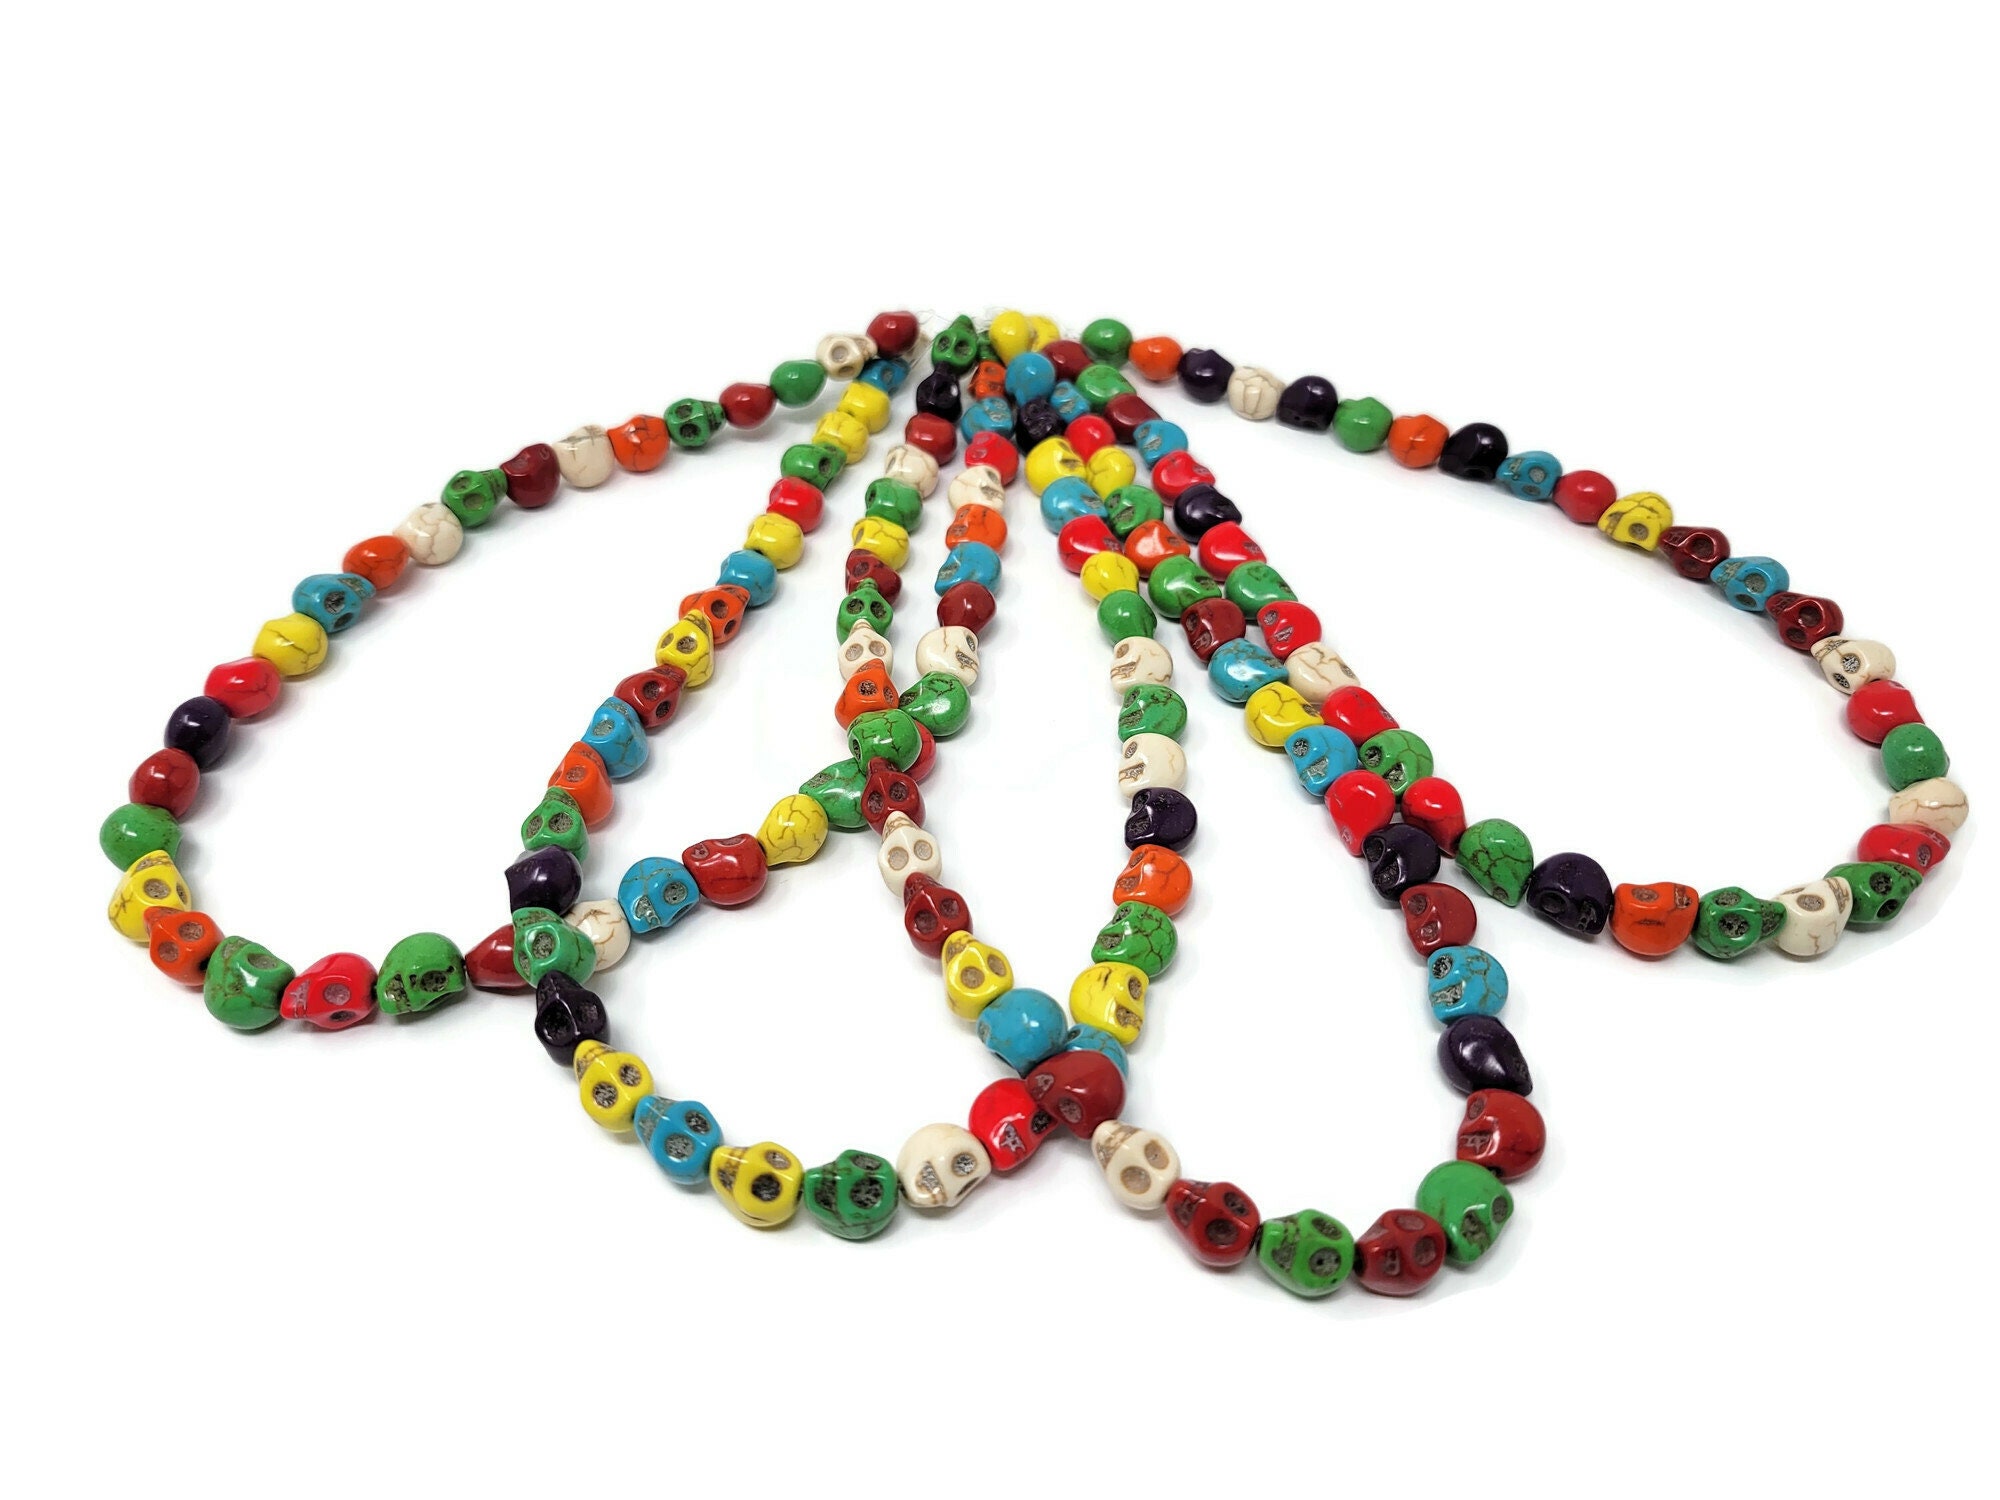 Mixed Color Small Skull Beads - 8mm by 7mm by 6mm - 48 beads - Whole Strand  - rainbow howlite bead - colorful synthetic turquoise skulls